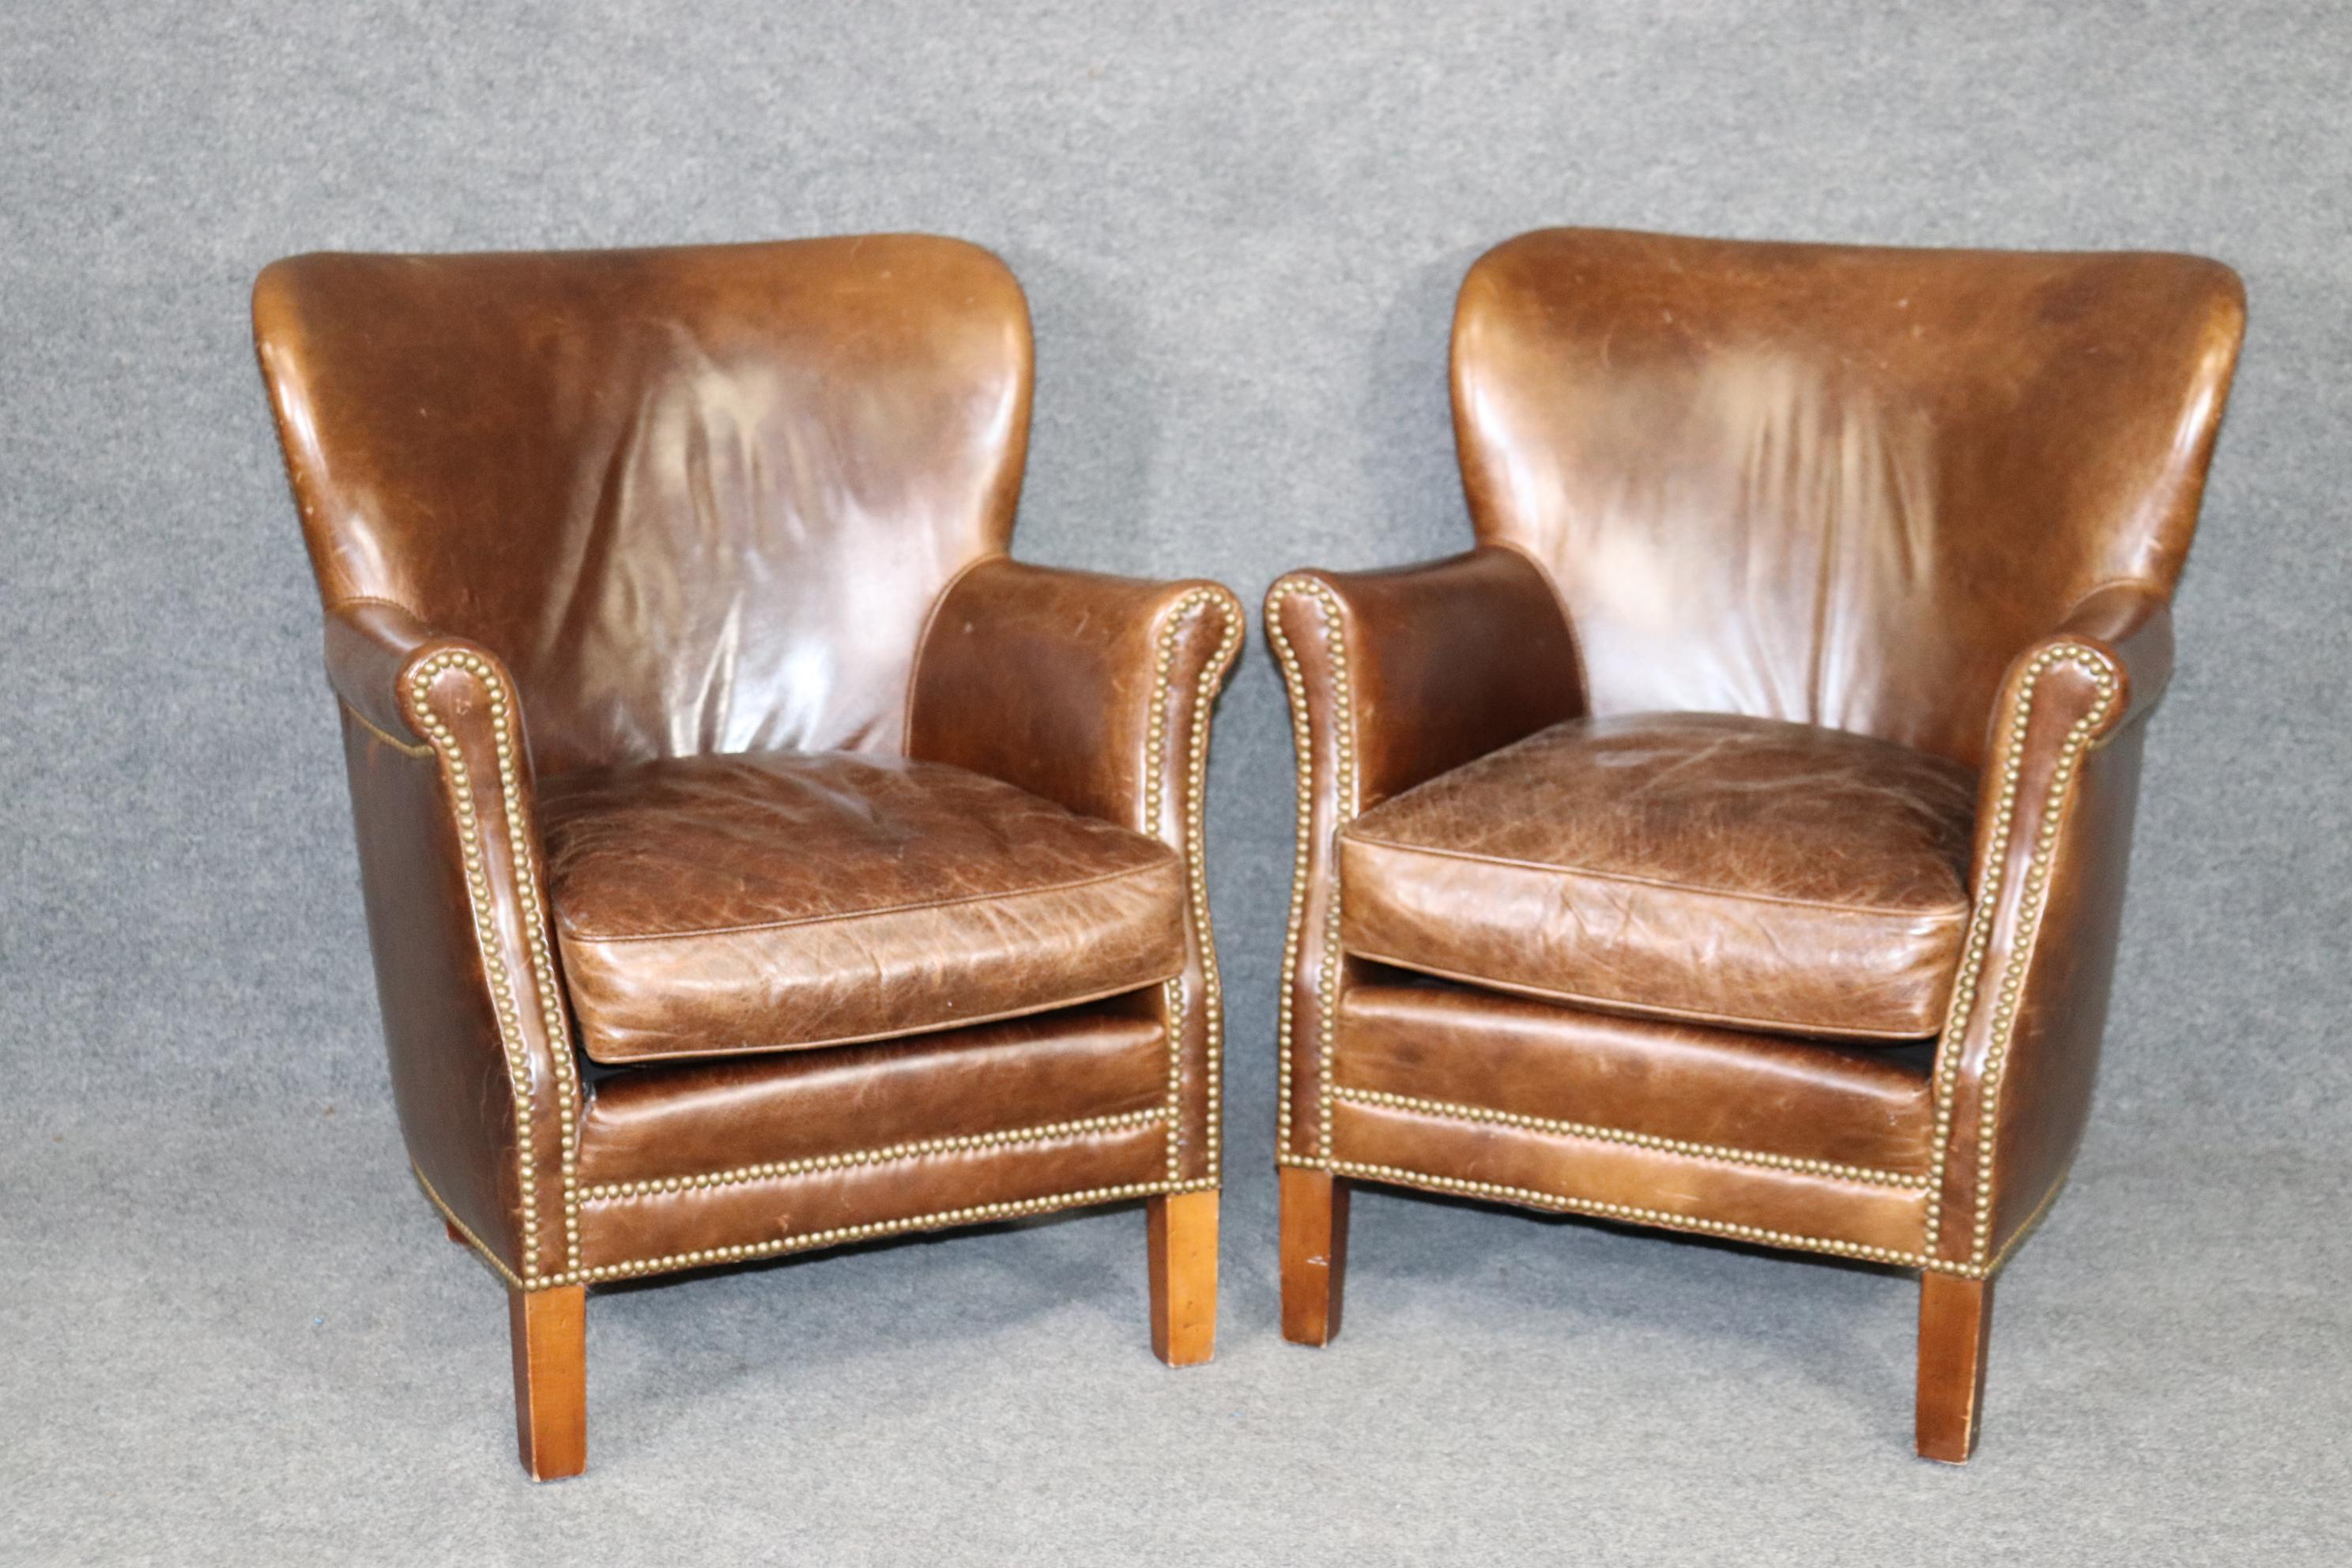 This is a fantastic pair of Antique -looking aged leather club chairs by Lee Industries leather of North Carolina. They made these chairs to look antique with intentionally distressed leather and look fantastic and well-lived in. The chairs have